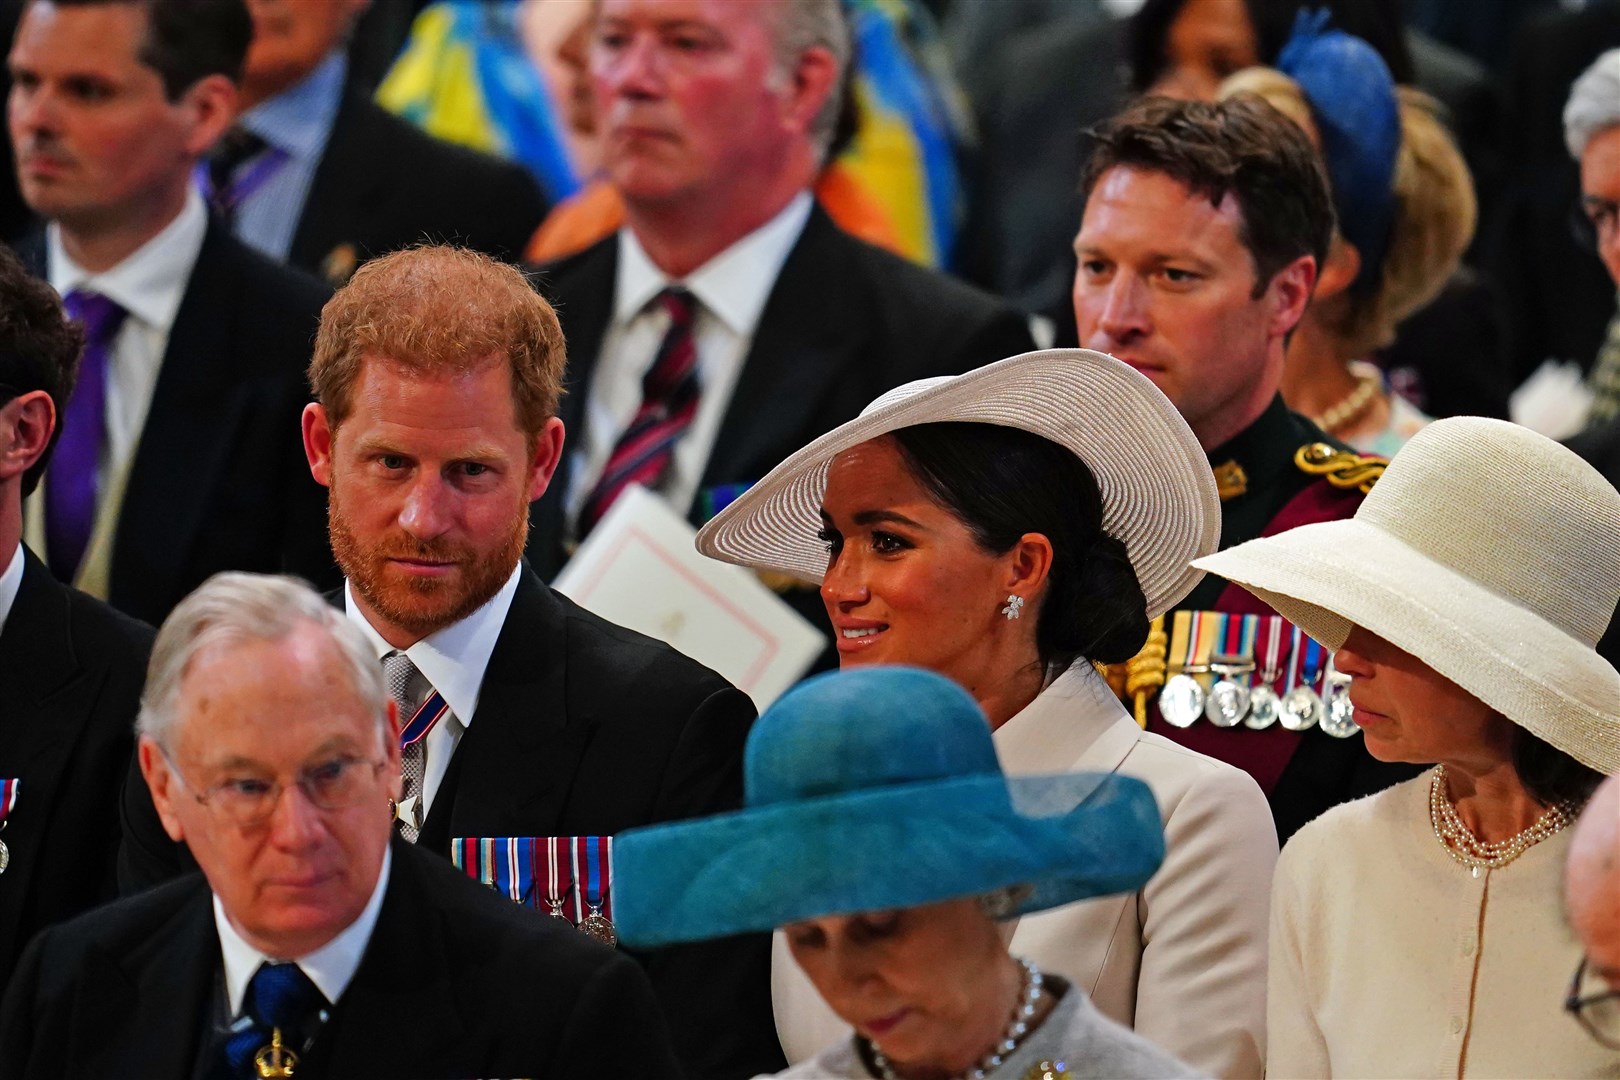 The Duke and Duchess of Sussex and Lady Sarah Chatto during the service (PA)